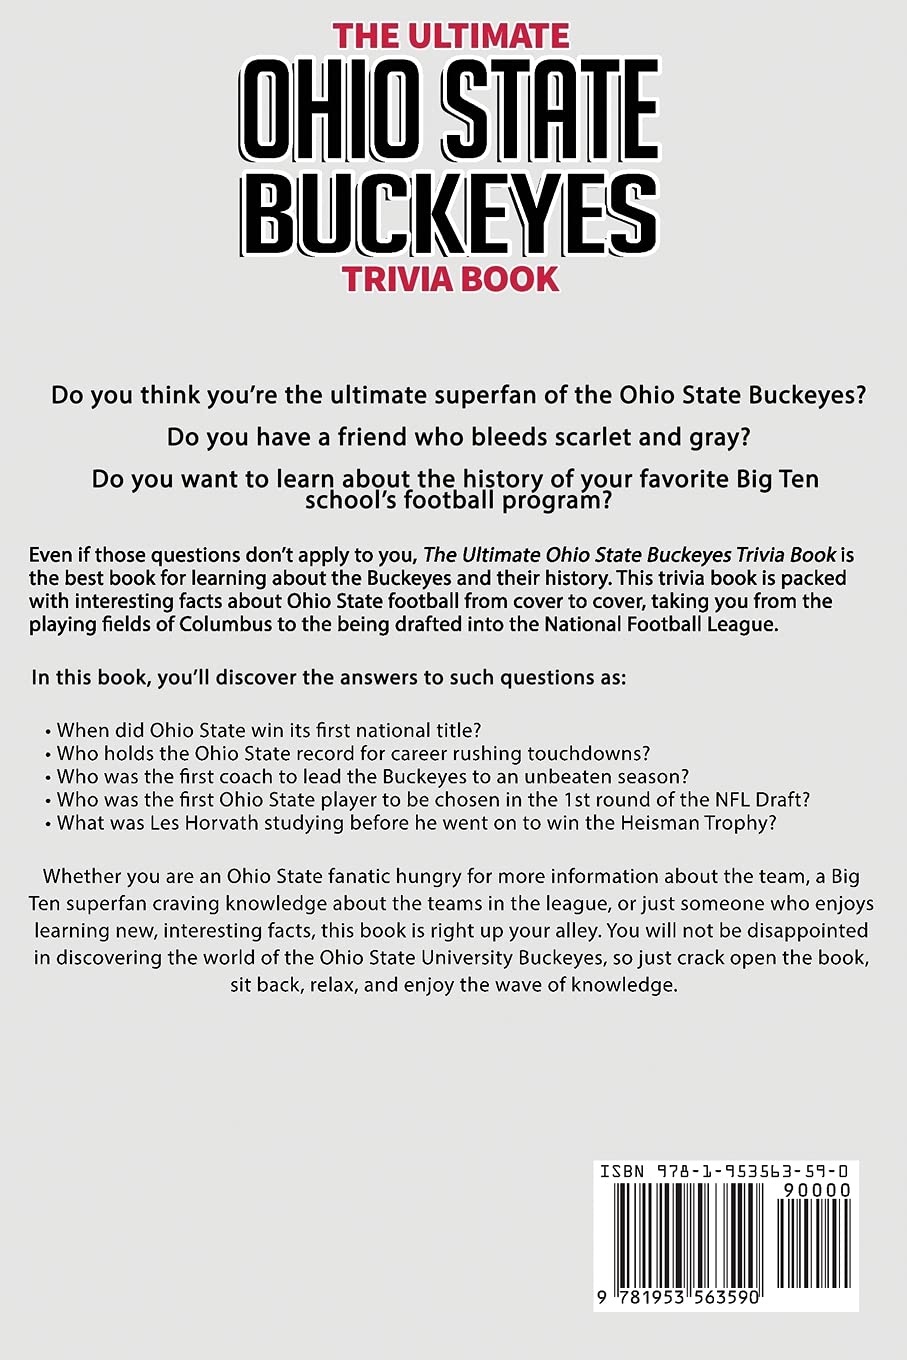 The Ultimate Ohio State Buckeyes Trivia Book: A Collection of Amazing Trivia Quizzes and Fun Facts for Die-Hard Buckeyes Fans!